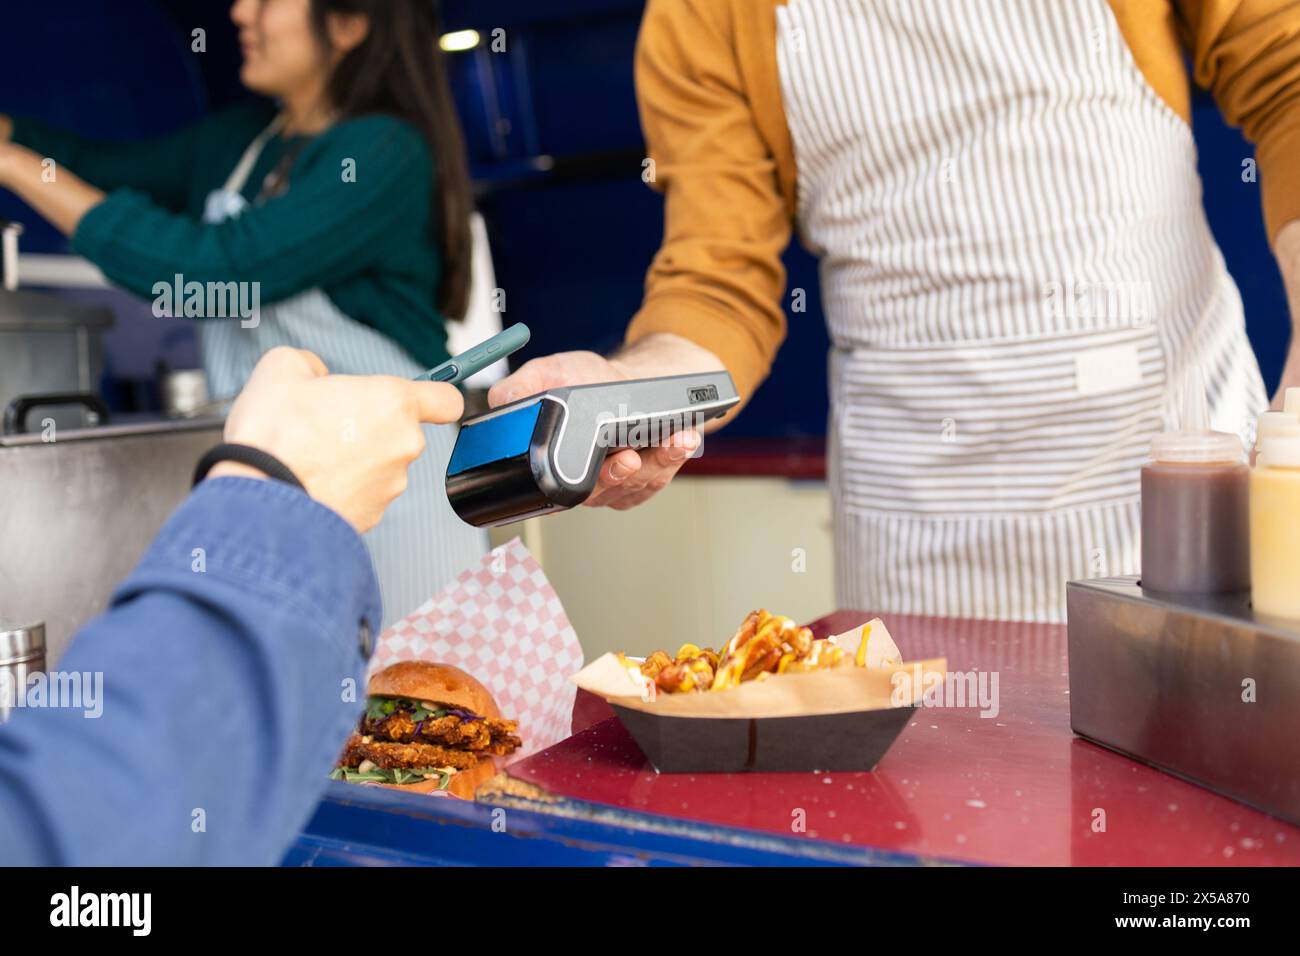 Customer making a card payment for street food at a busy food truck while friends work together in the background Stock Photo